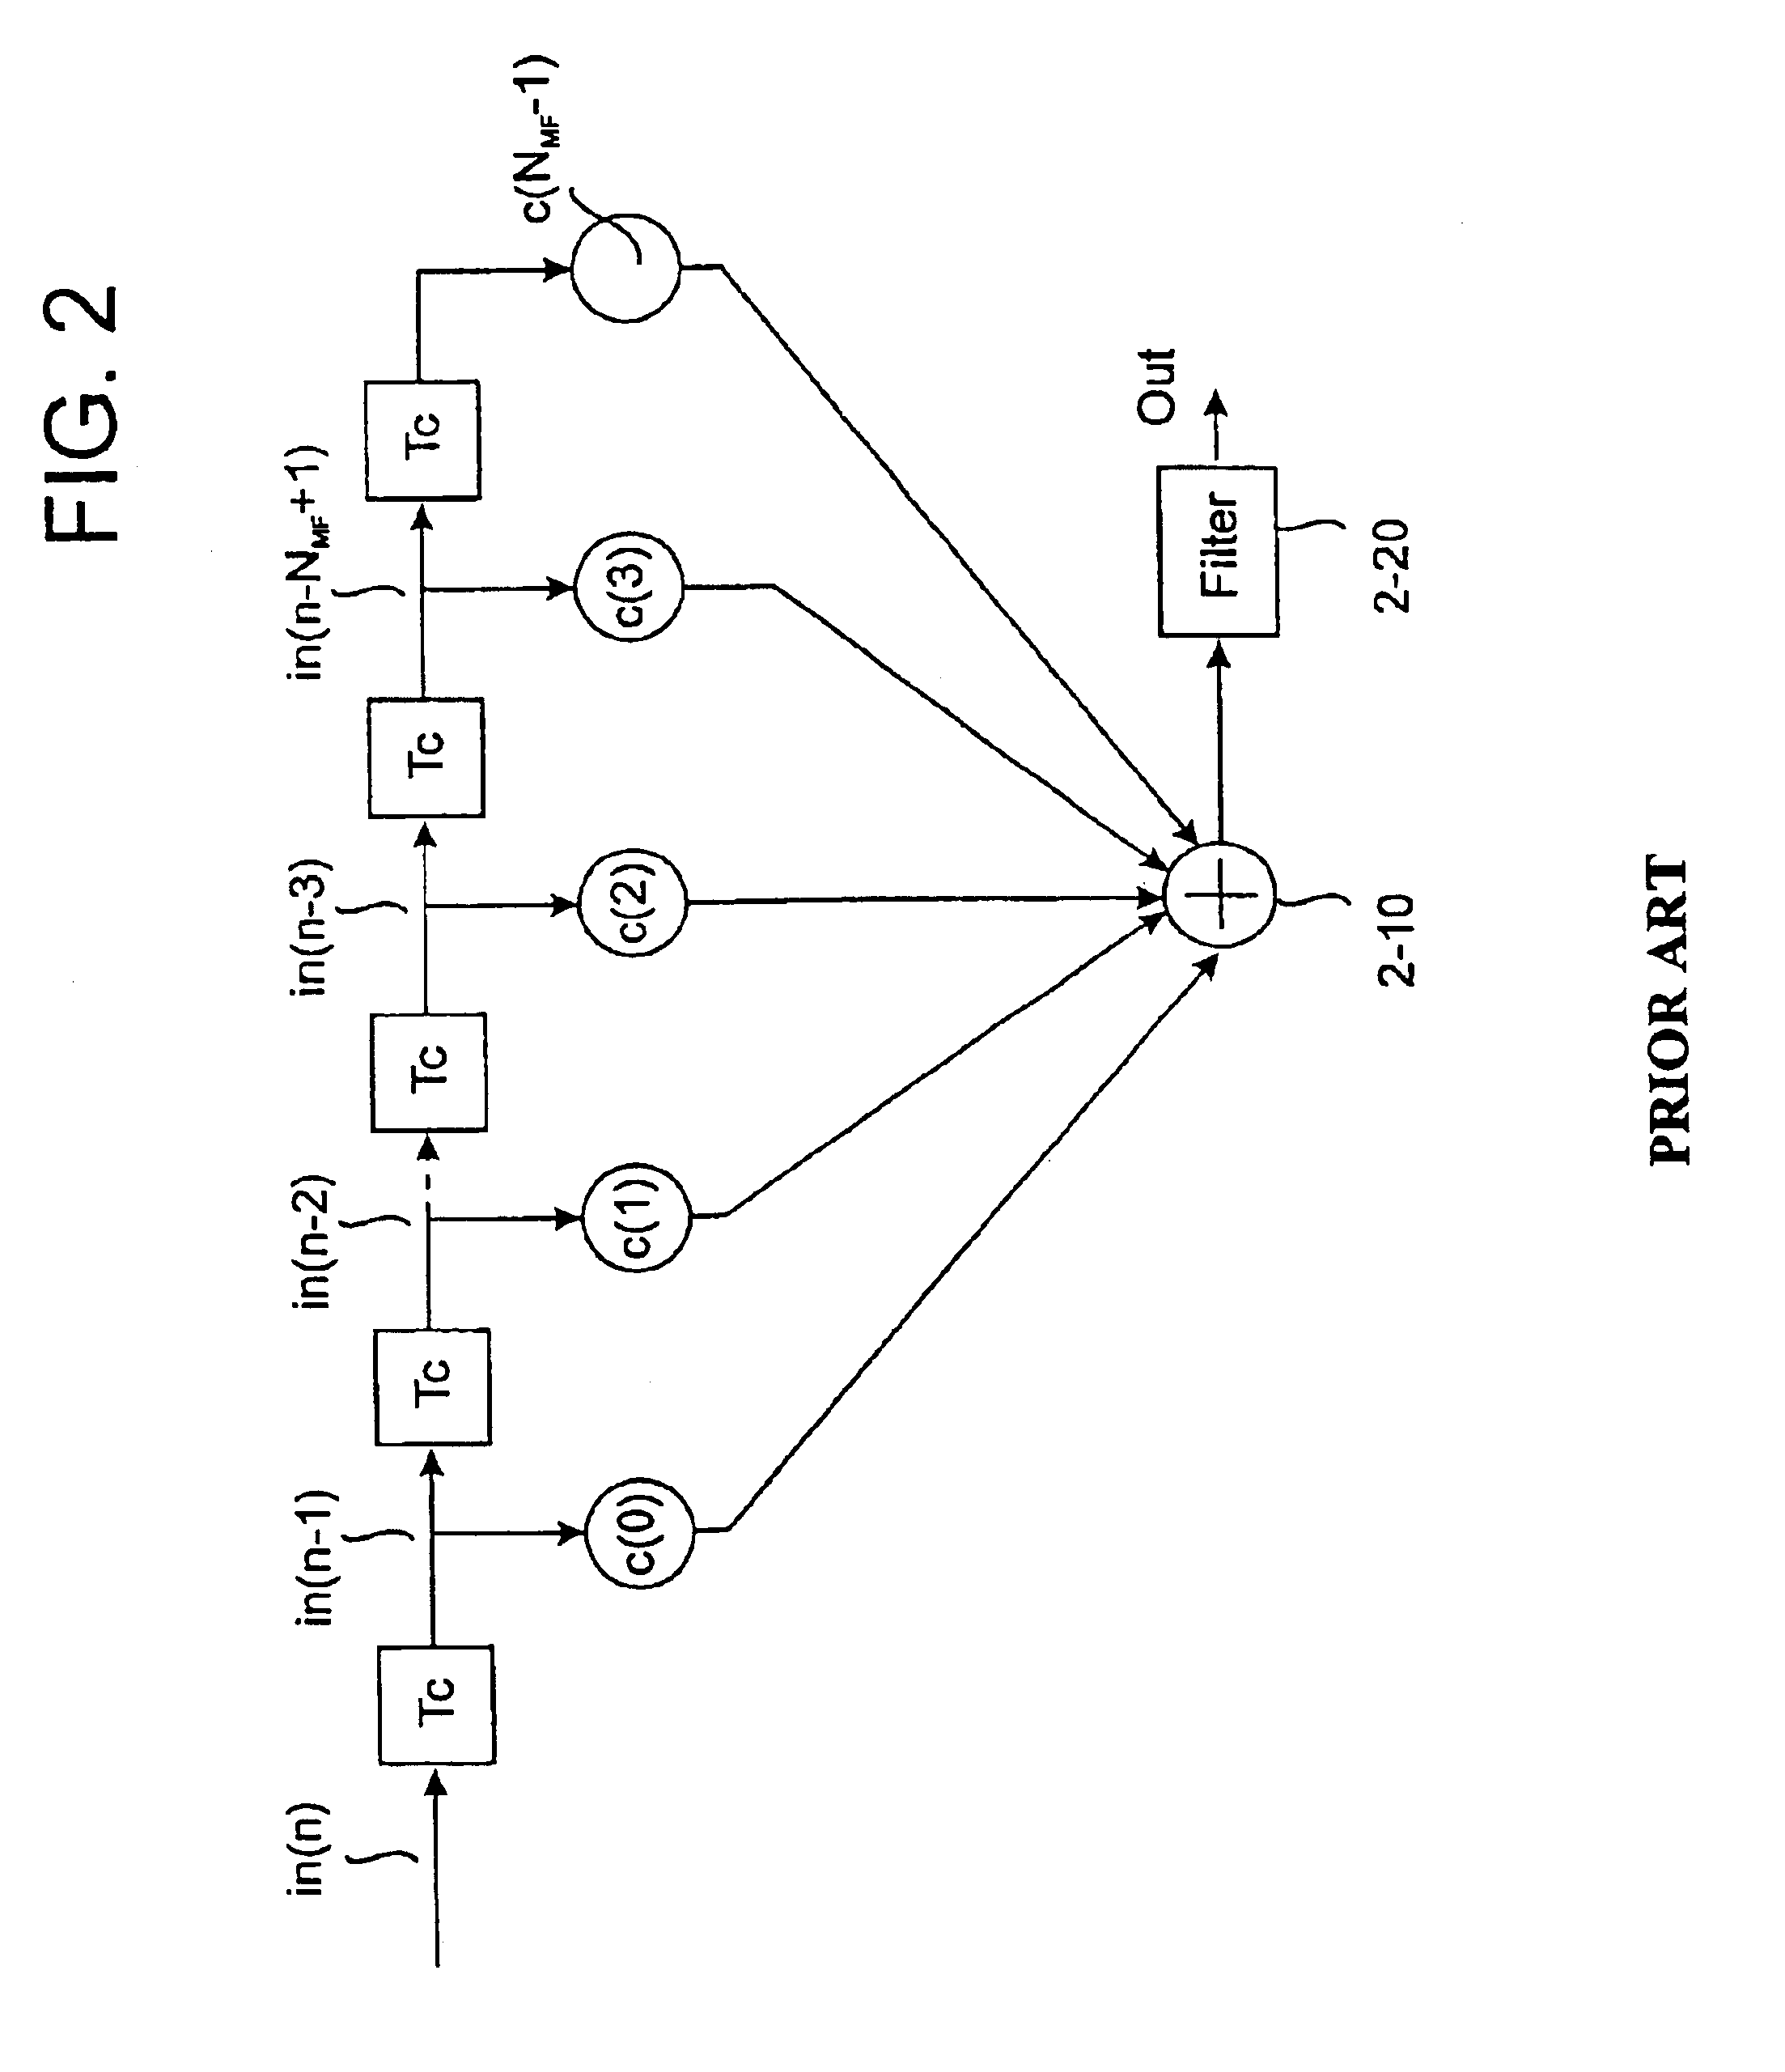 Signal acquisition system for spread spectrum receiver